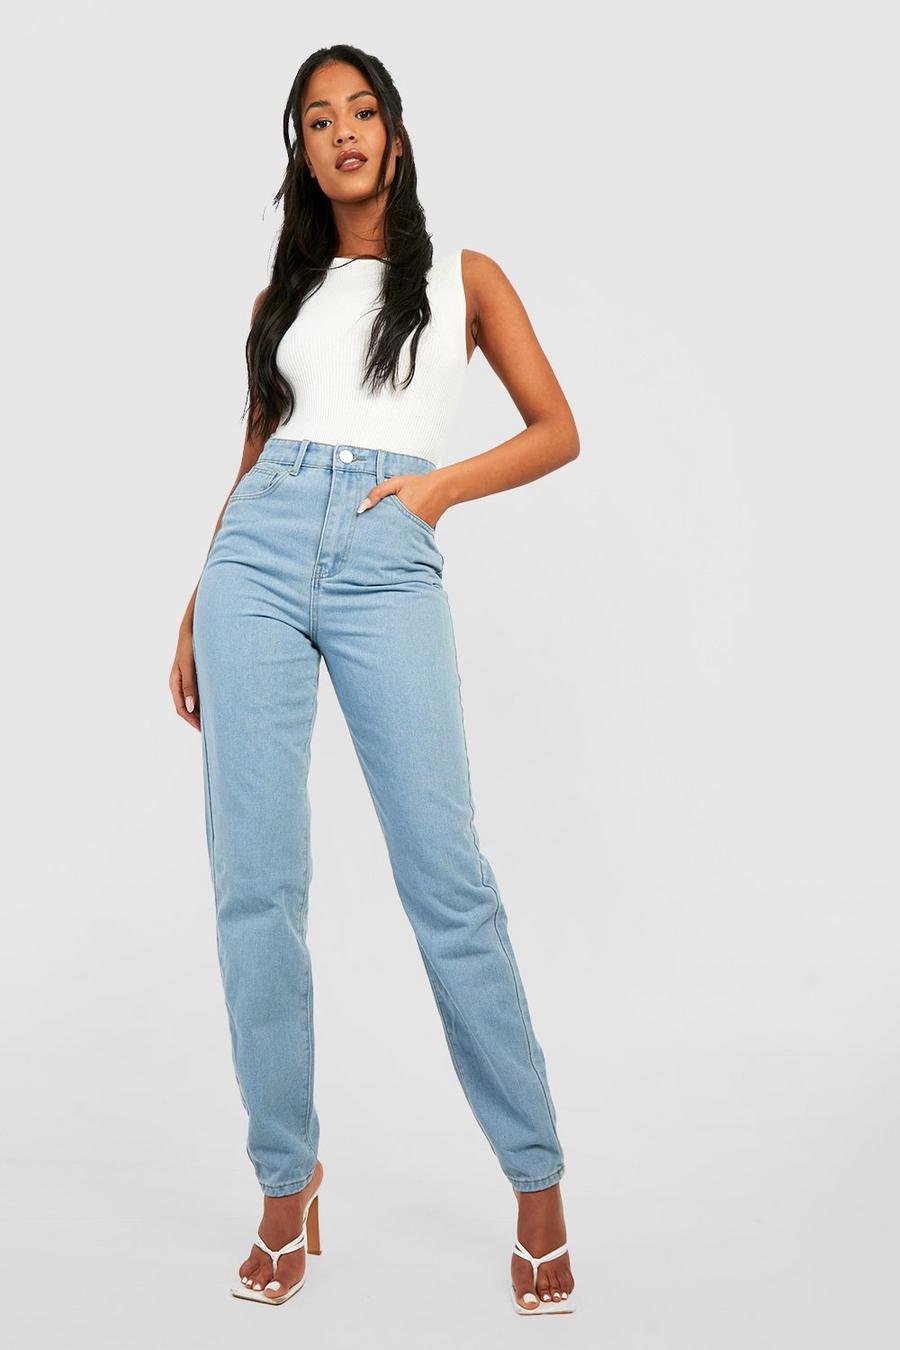 Buy Friends Like These Mid Blue Tall High Waisted Jeggings from Next USA